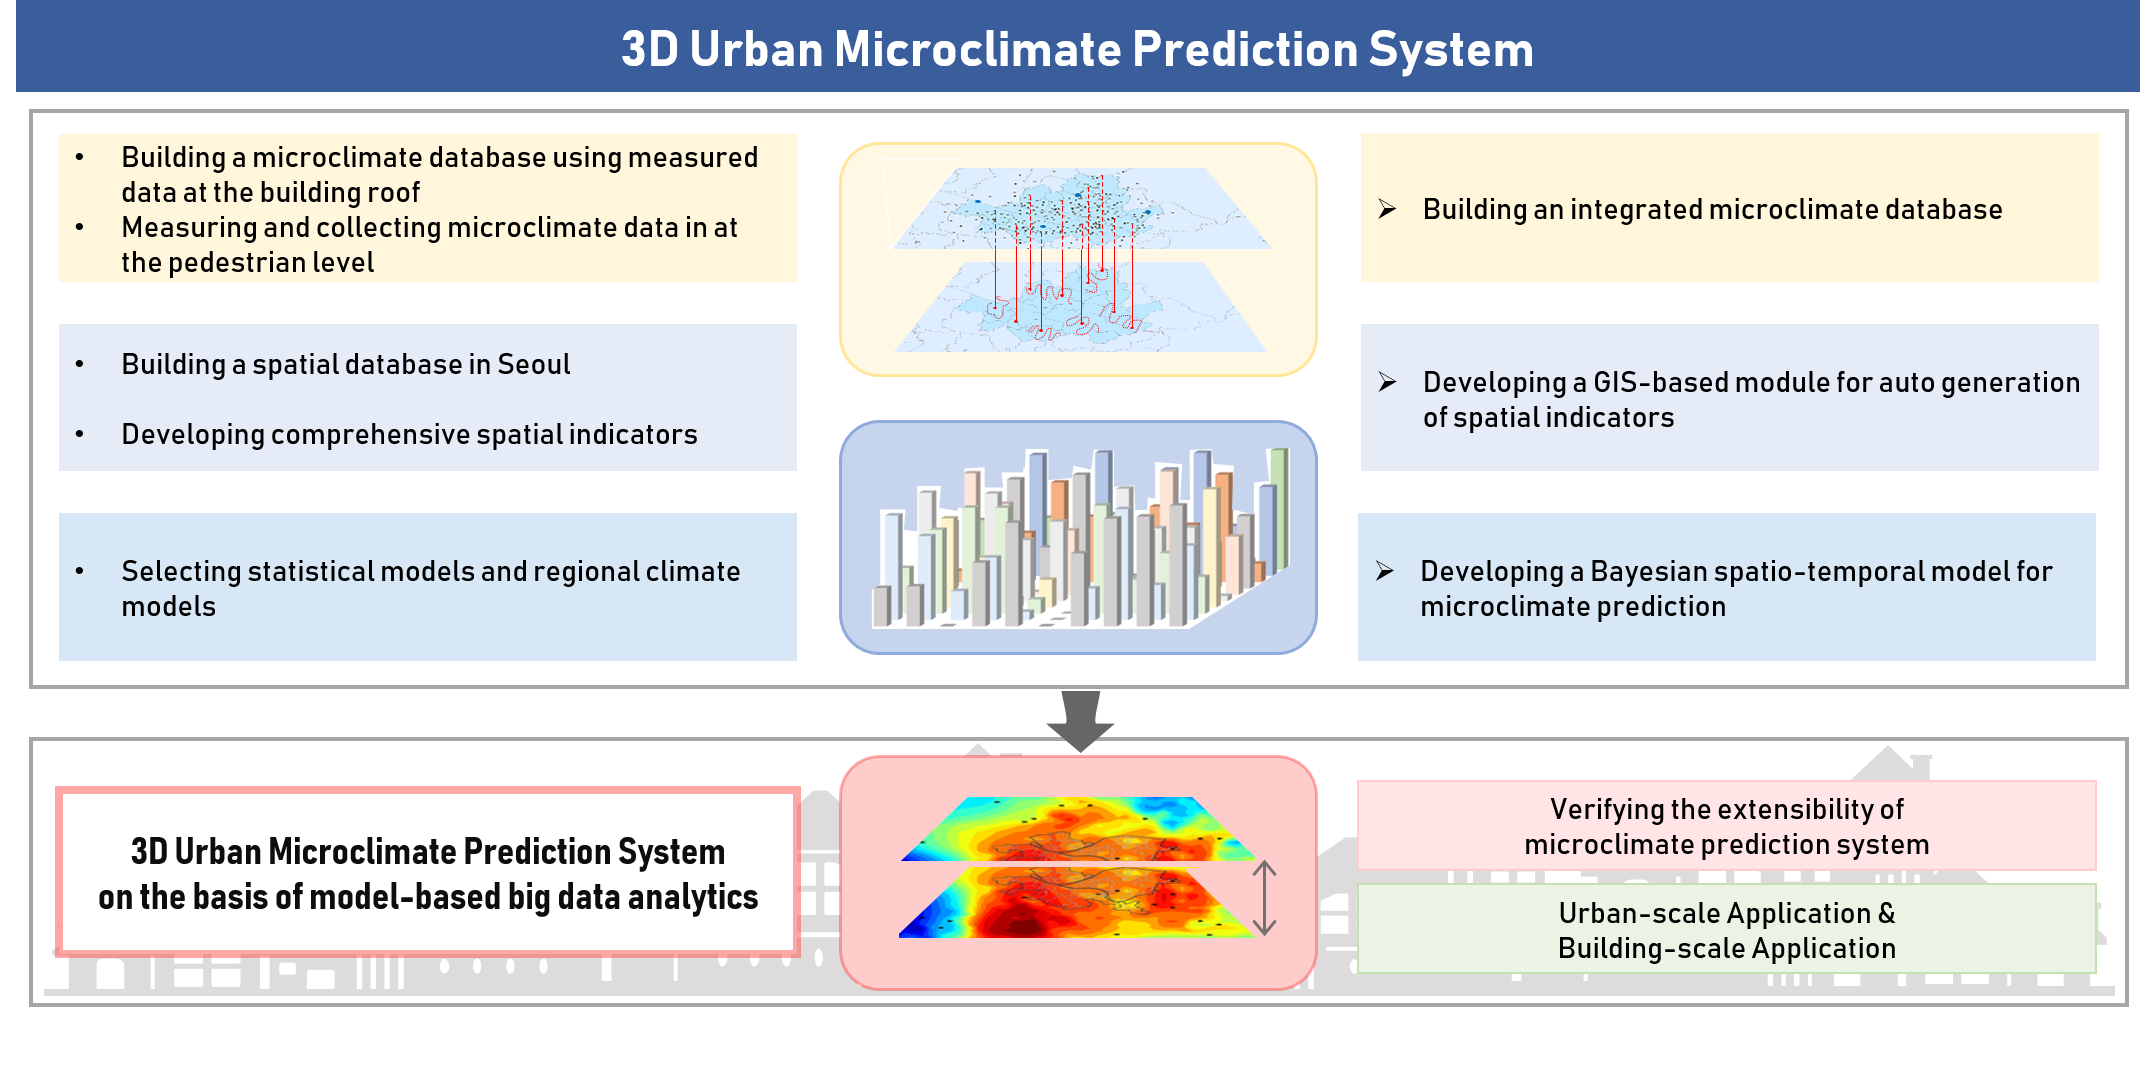 3D Urban Microclimate Prediction System